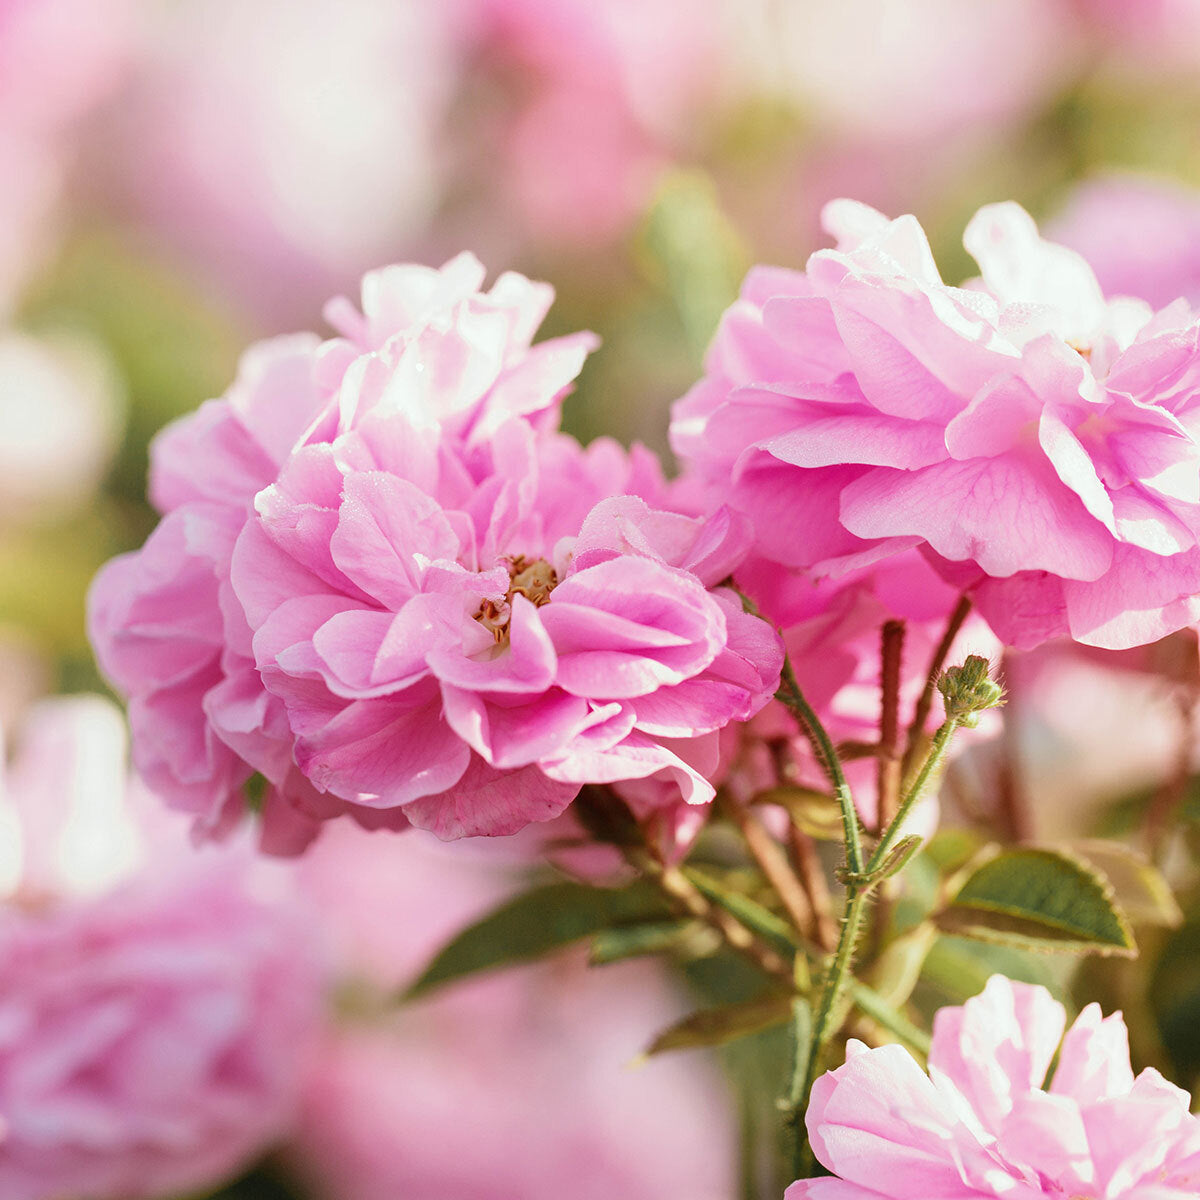 Used in aromatherapy, Rose Absolute oil creates a romantic atmosphere, reduces stress and anxiety and uplifts the mood.